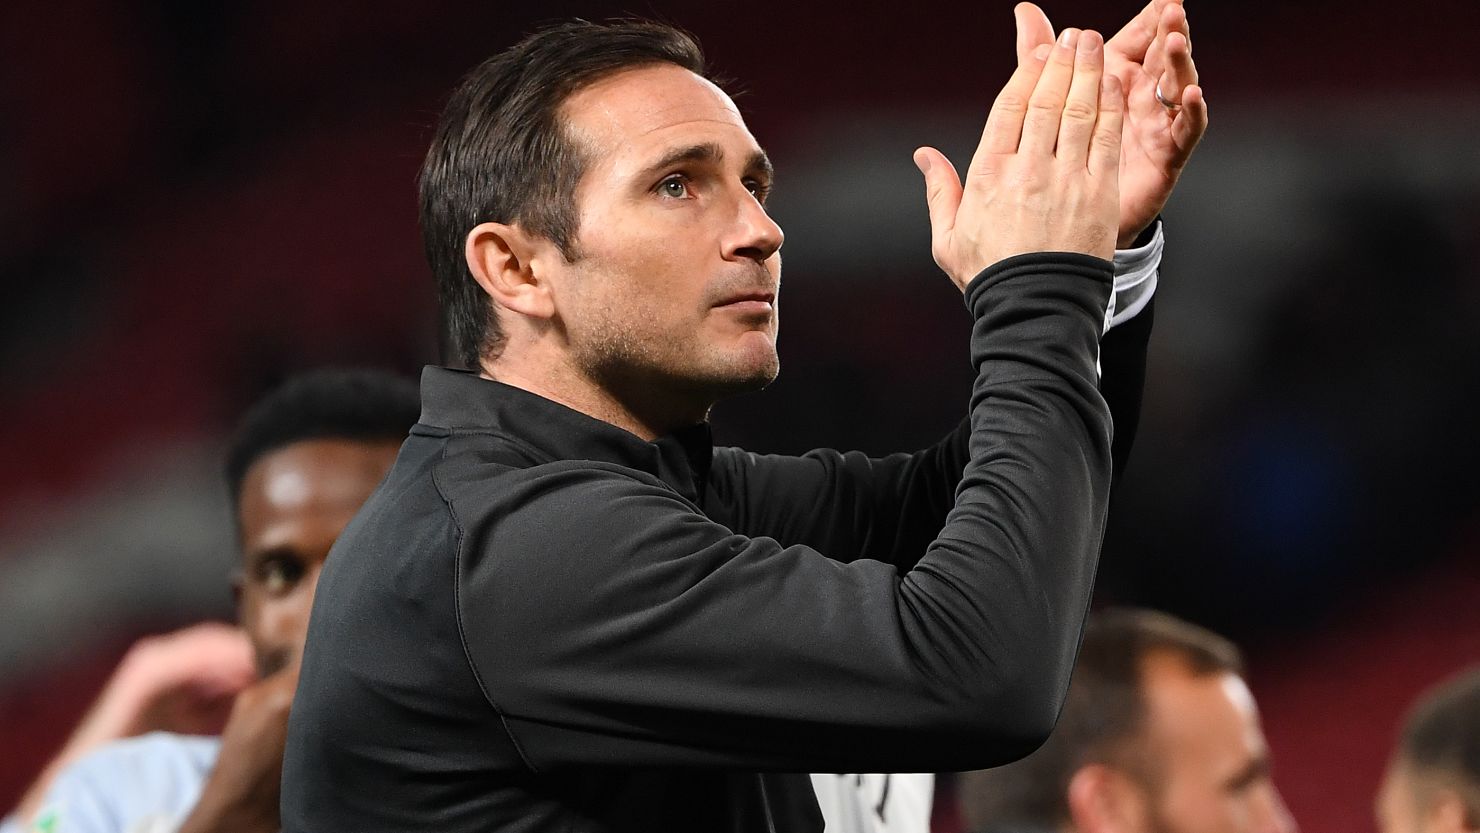 Derby's English manager Frank Lampard applauds the fans following their victory against Manchester United at Old Trafford.